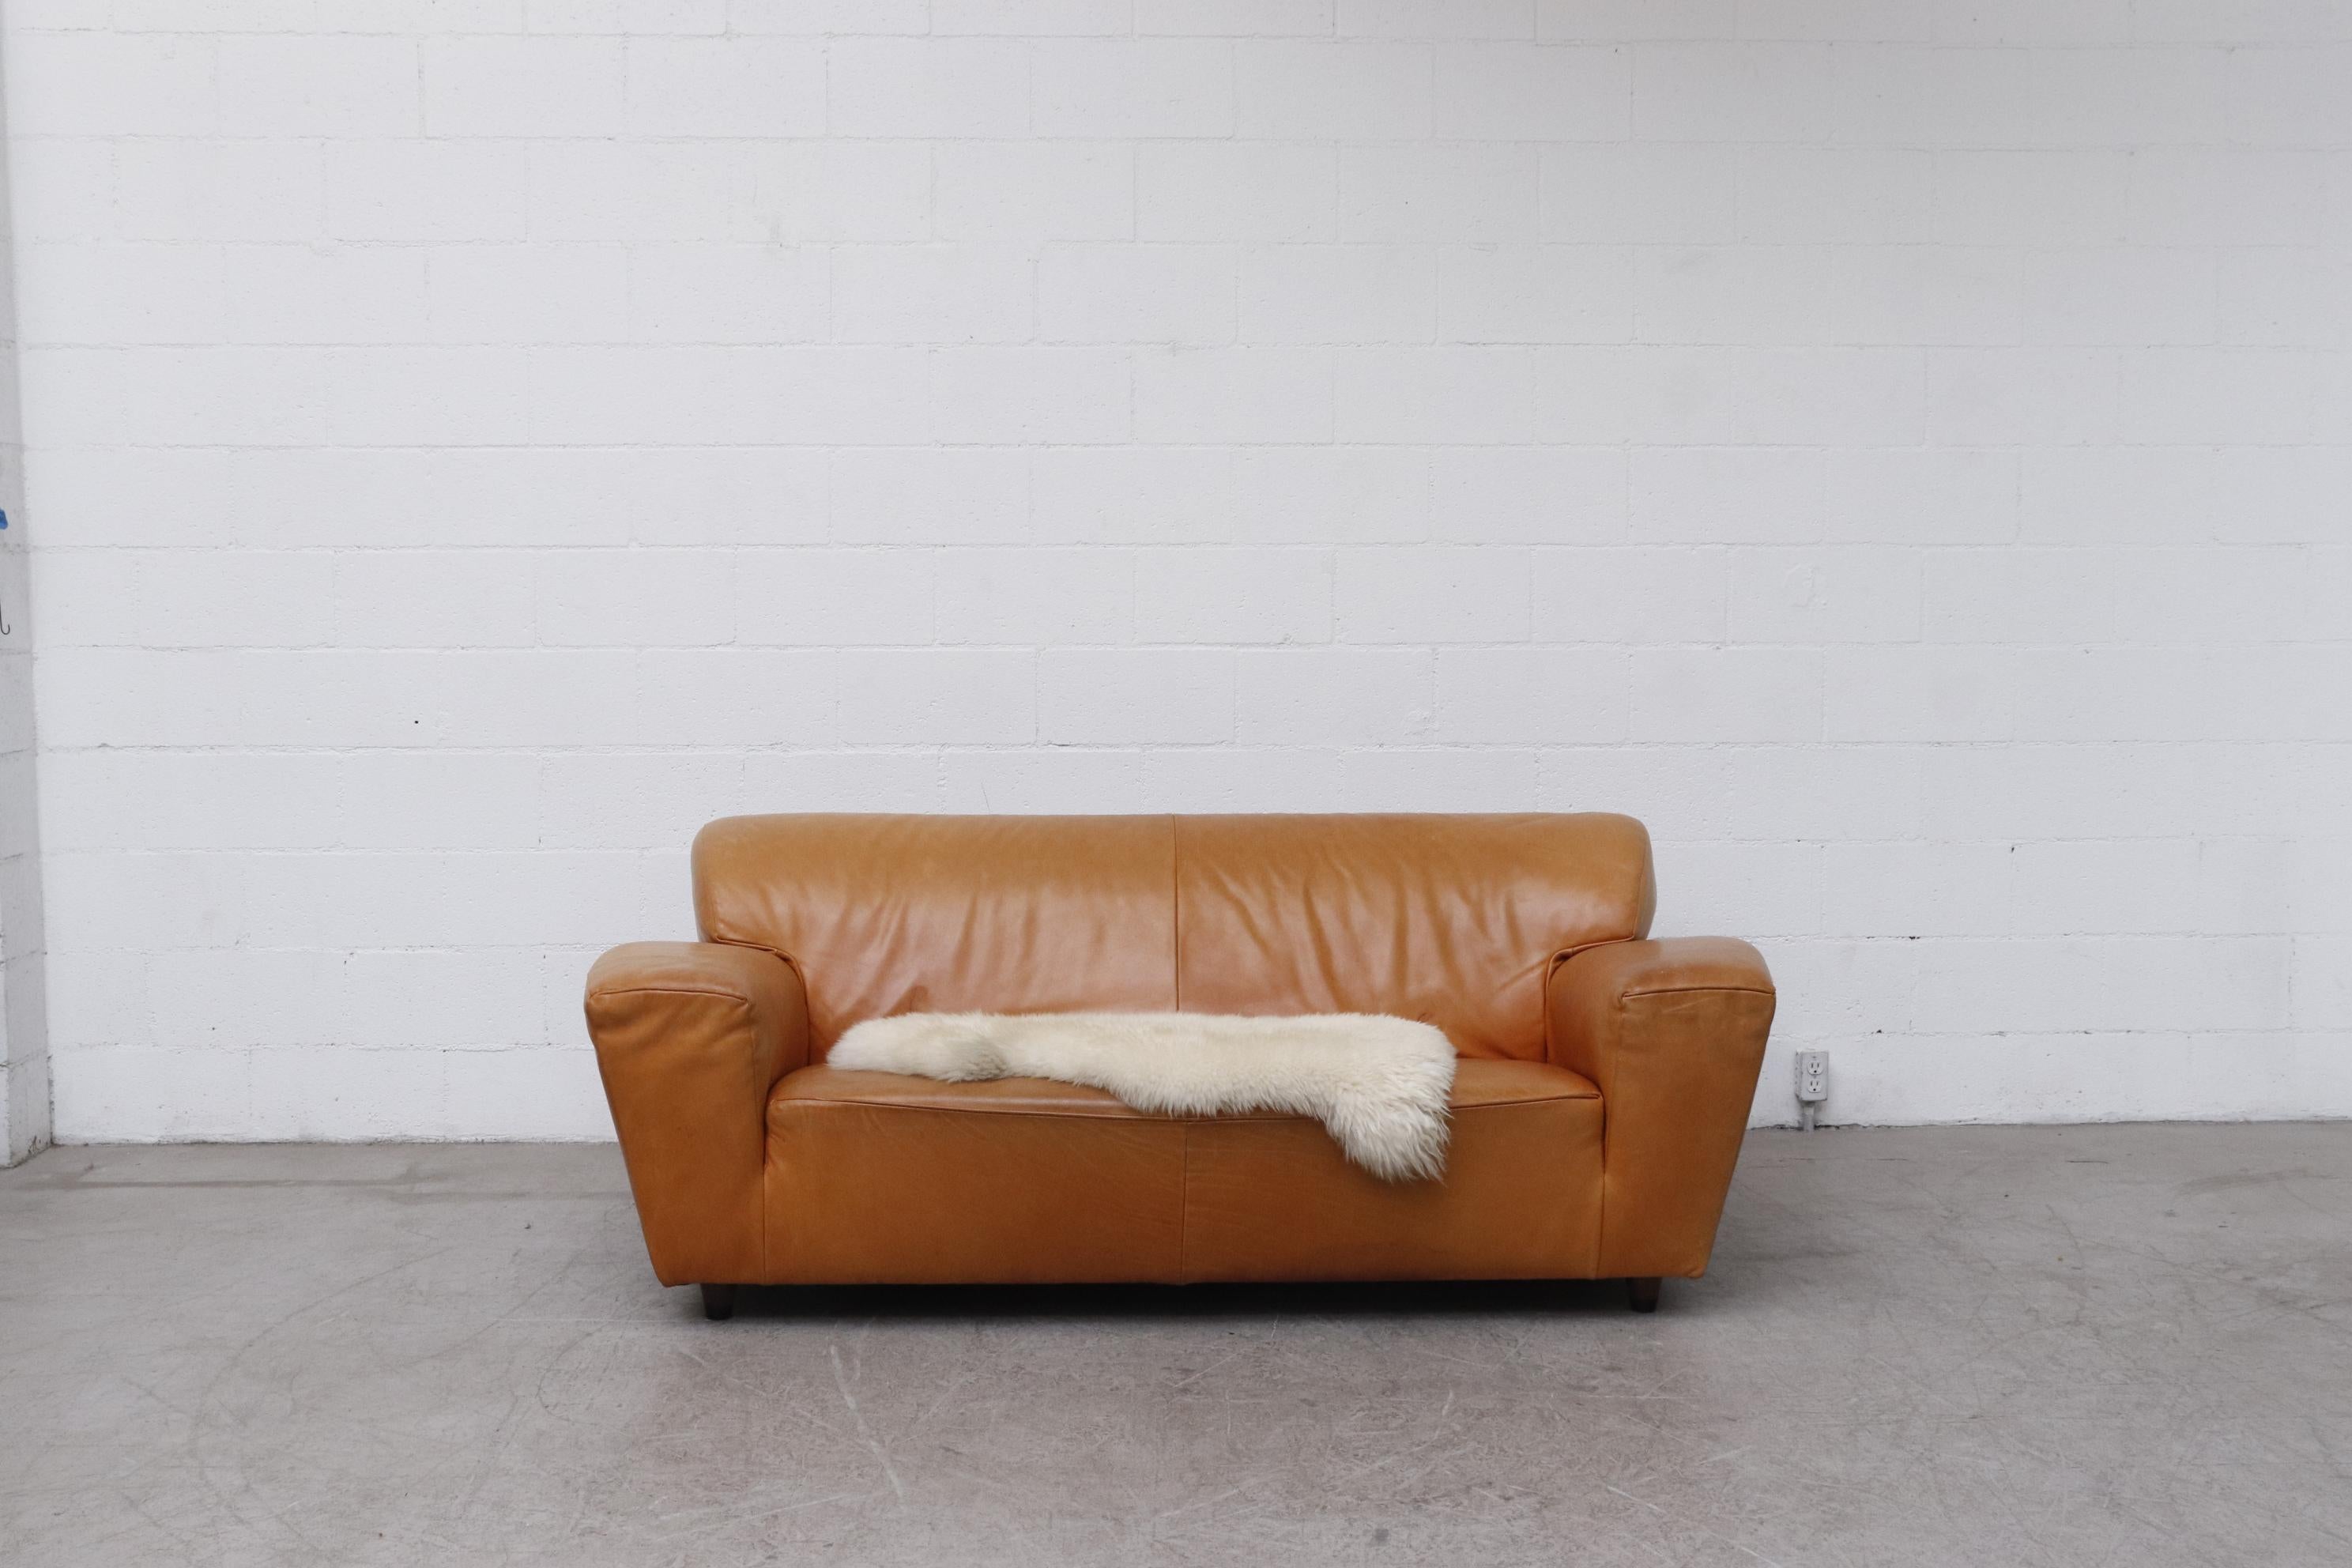 Gerard van den Berg 'Corvette' sofa in cognac leather with short tapered wood legs. In original condition with some visible wear and scratching consistent with age and use.